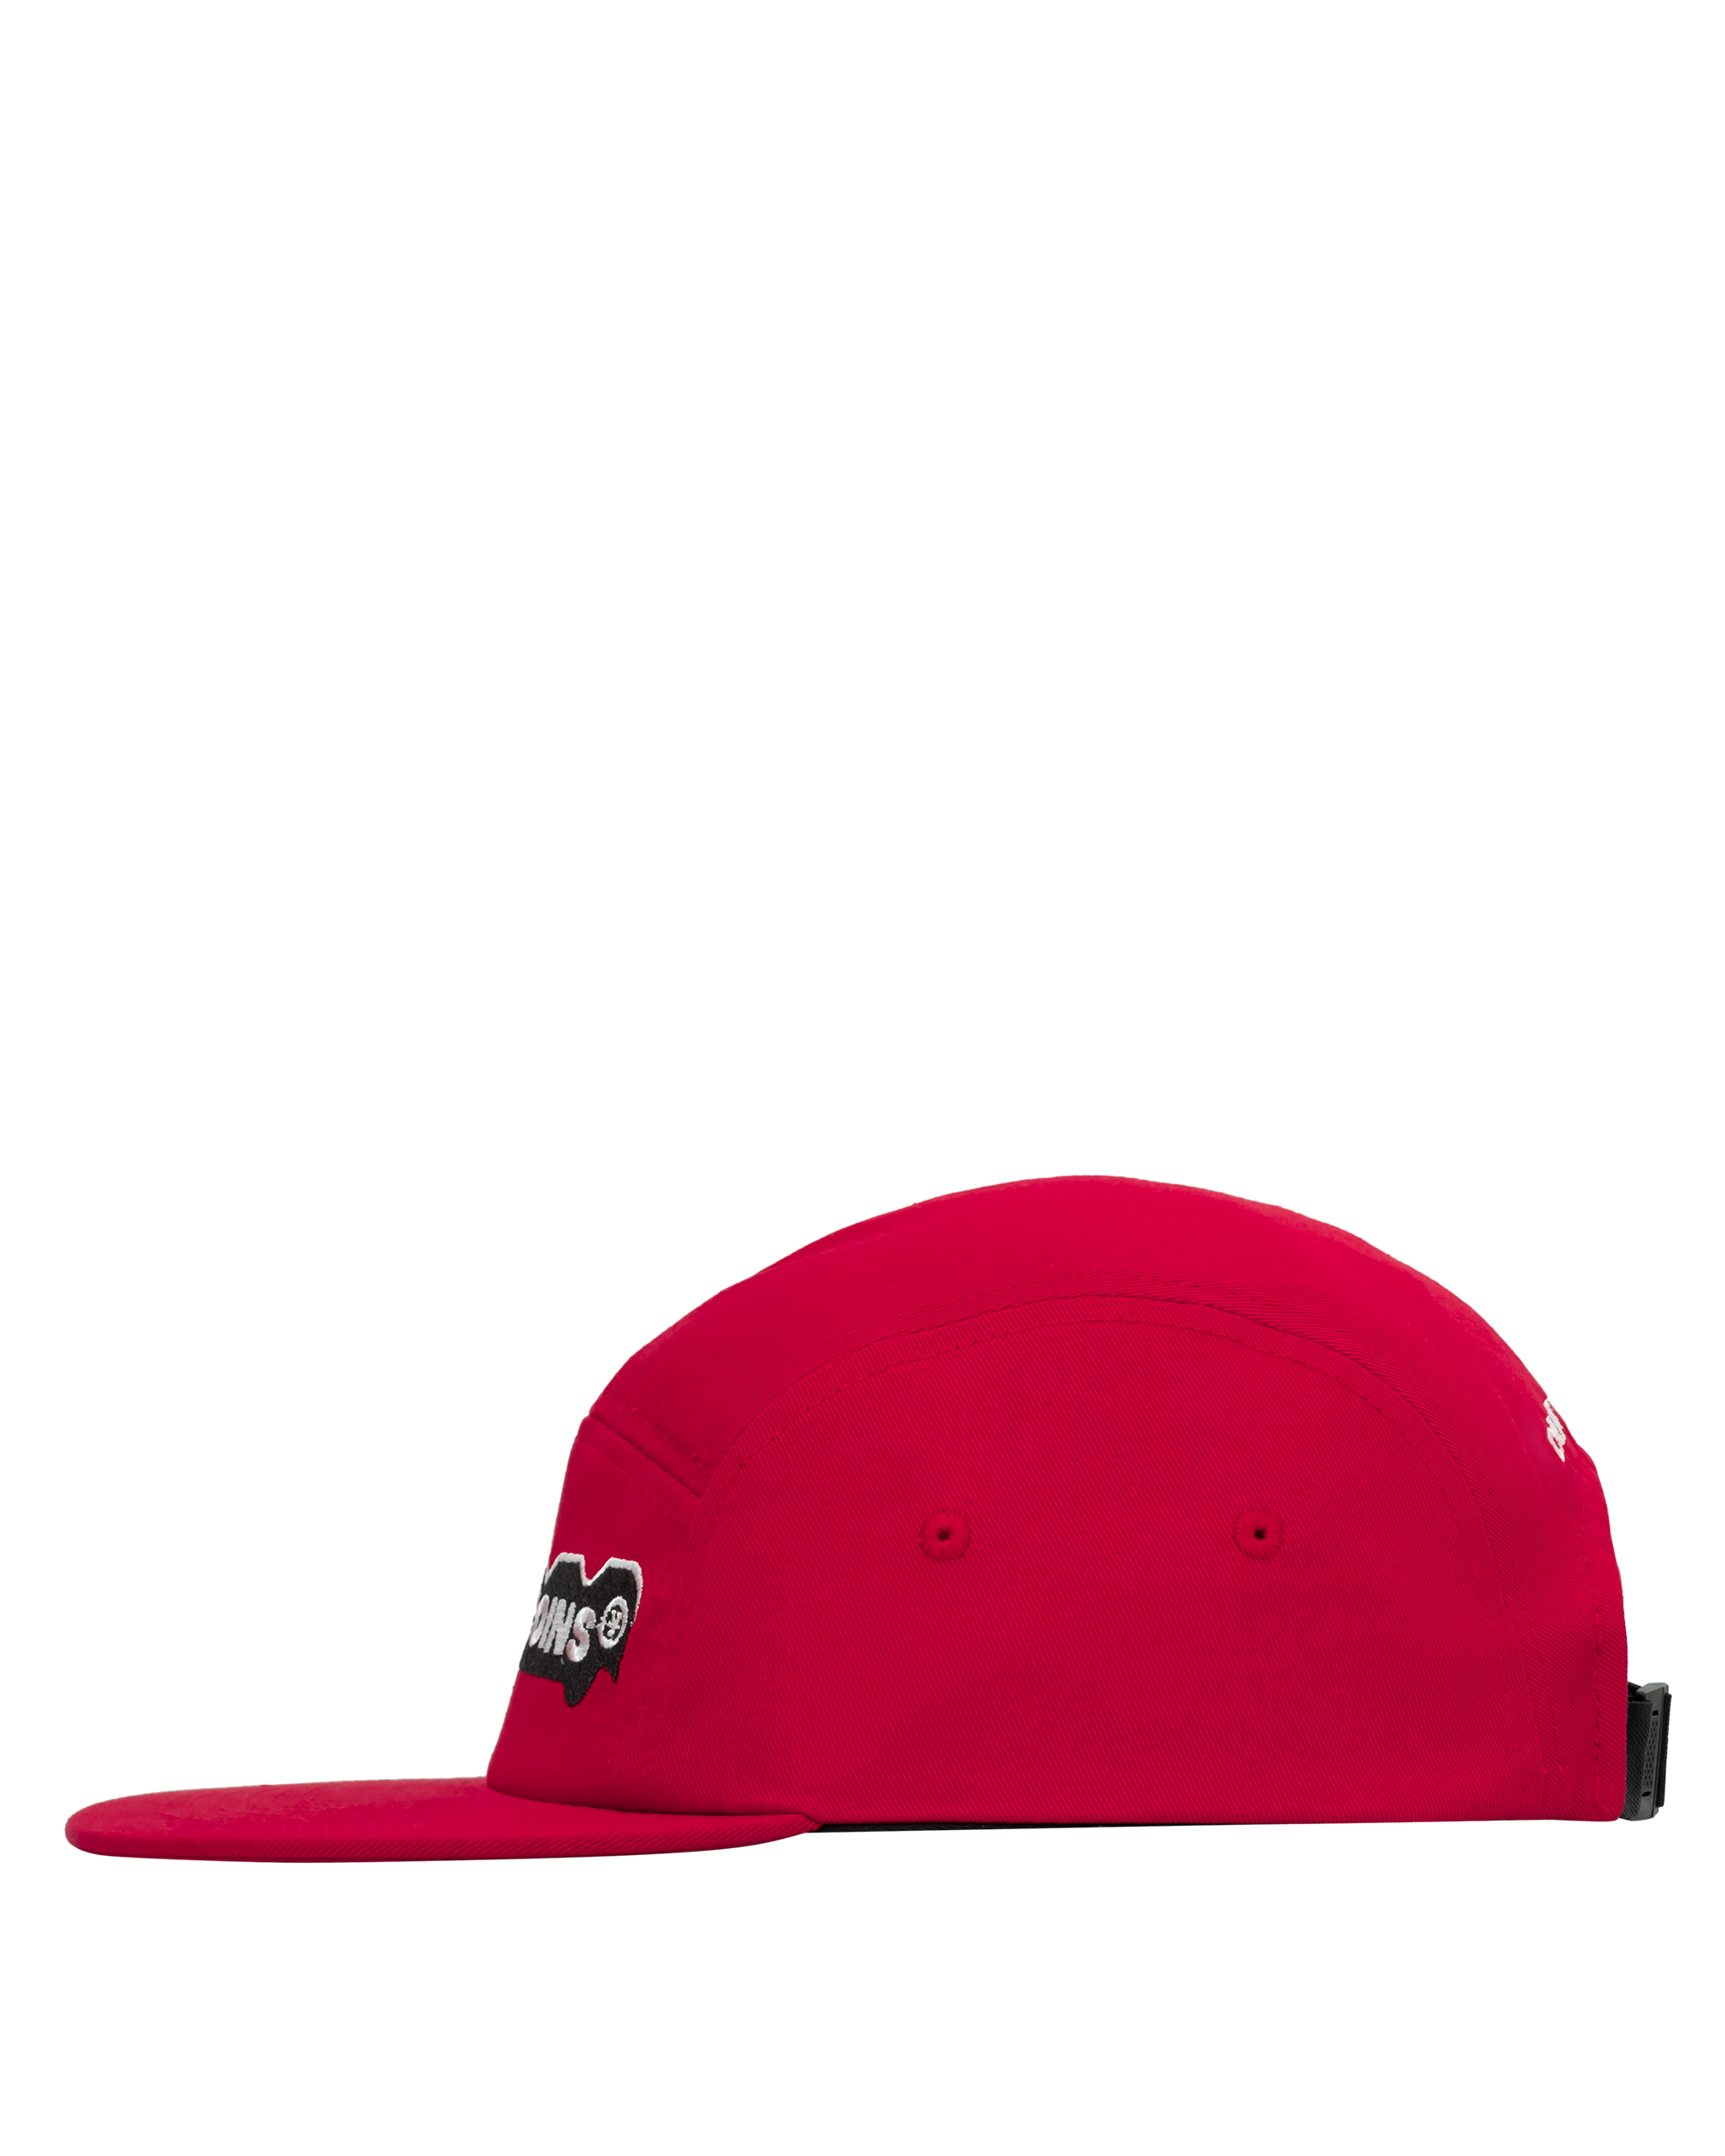 DirtyCoins 5 Panels Cap - Red